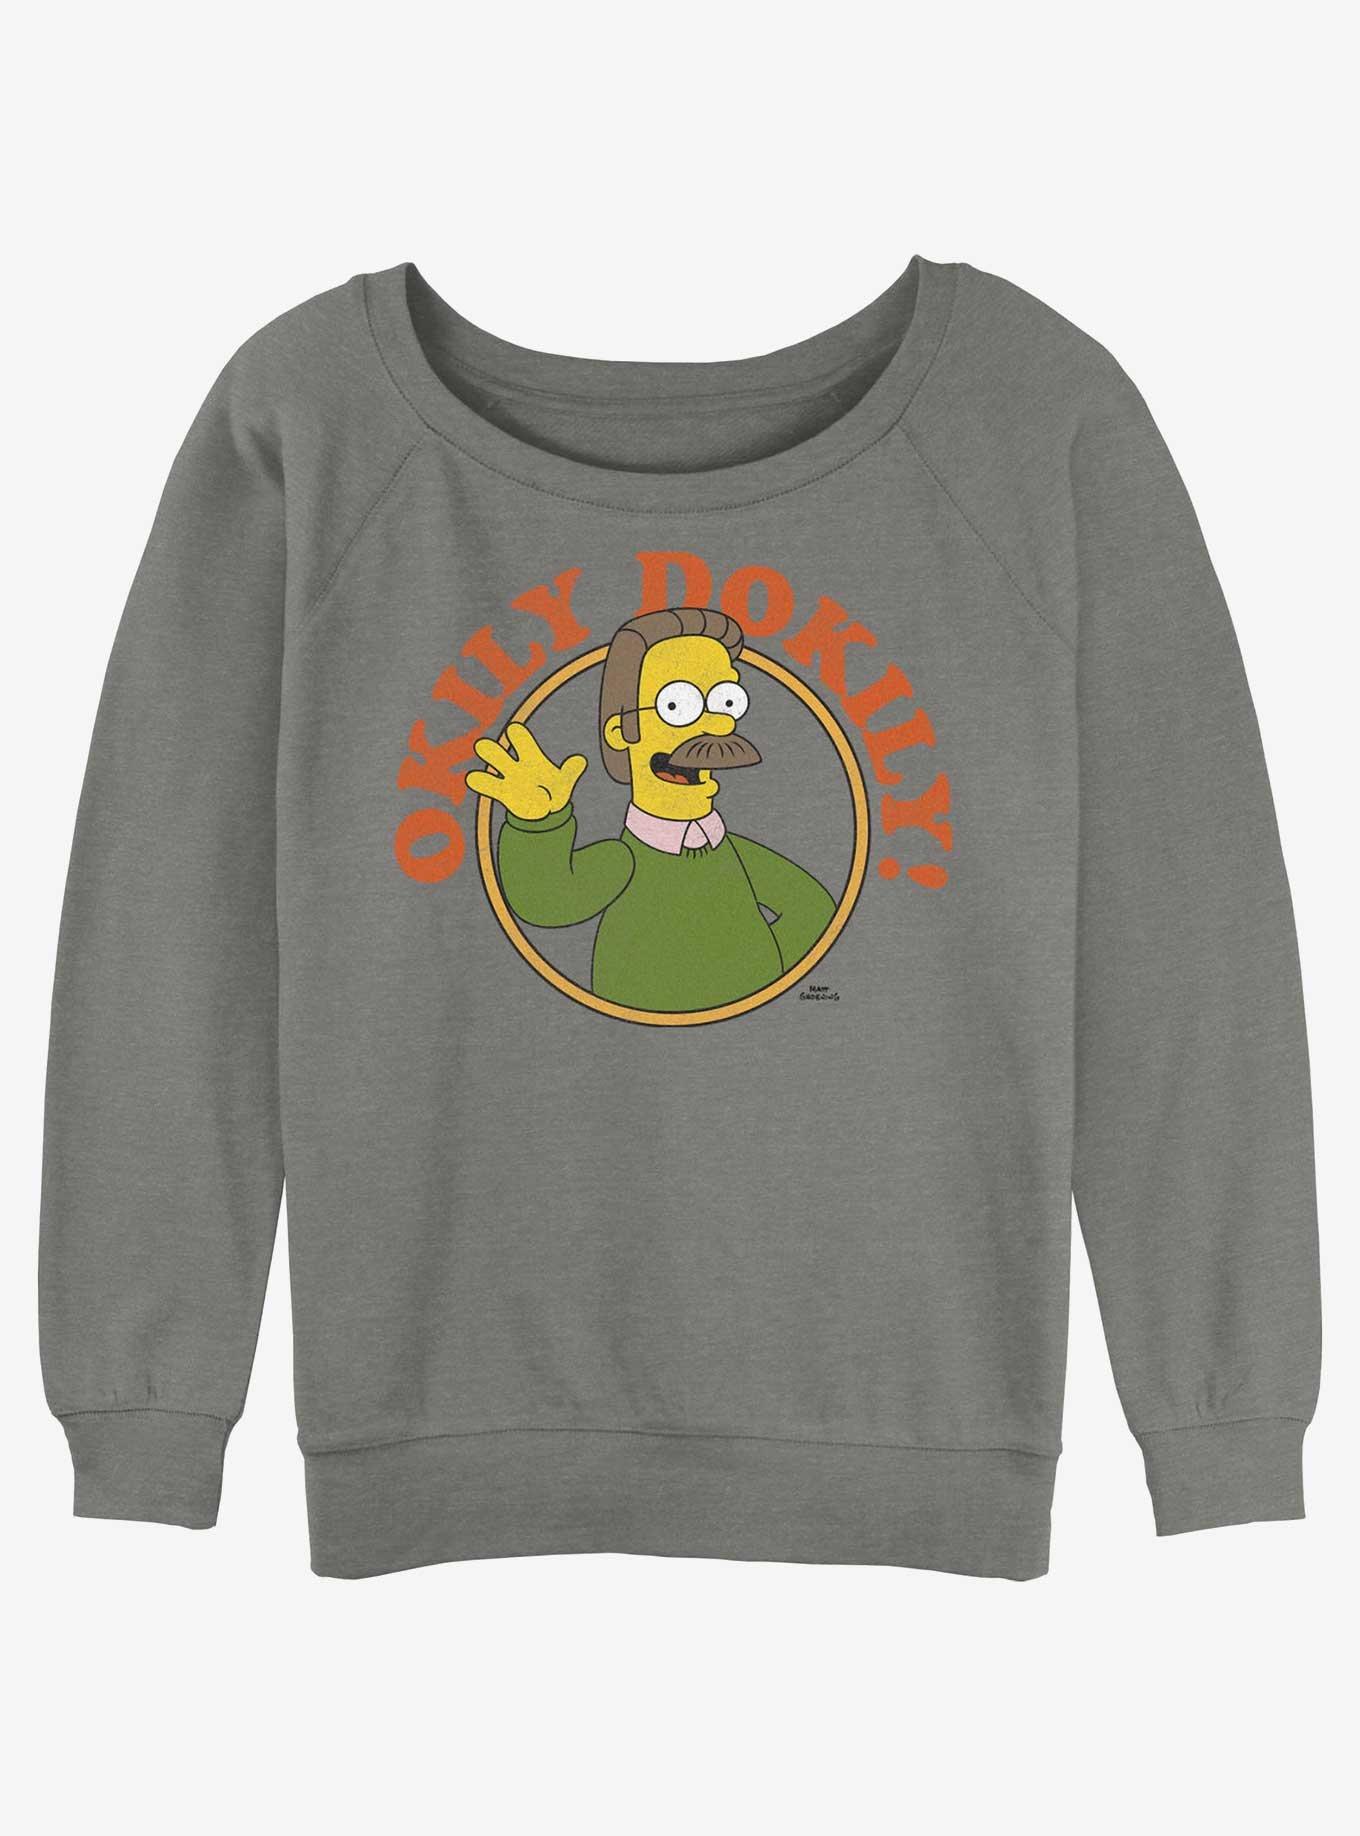 The Simpsons Okily Dokily Ned Flanders Girls Slouchy Sweatshirt, GRAY HTR, hi-res